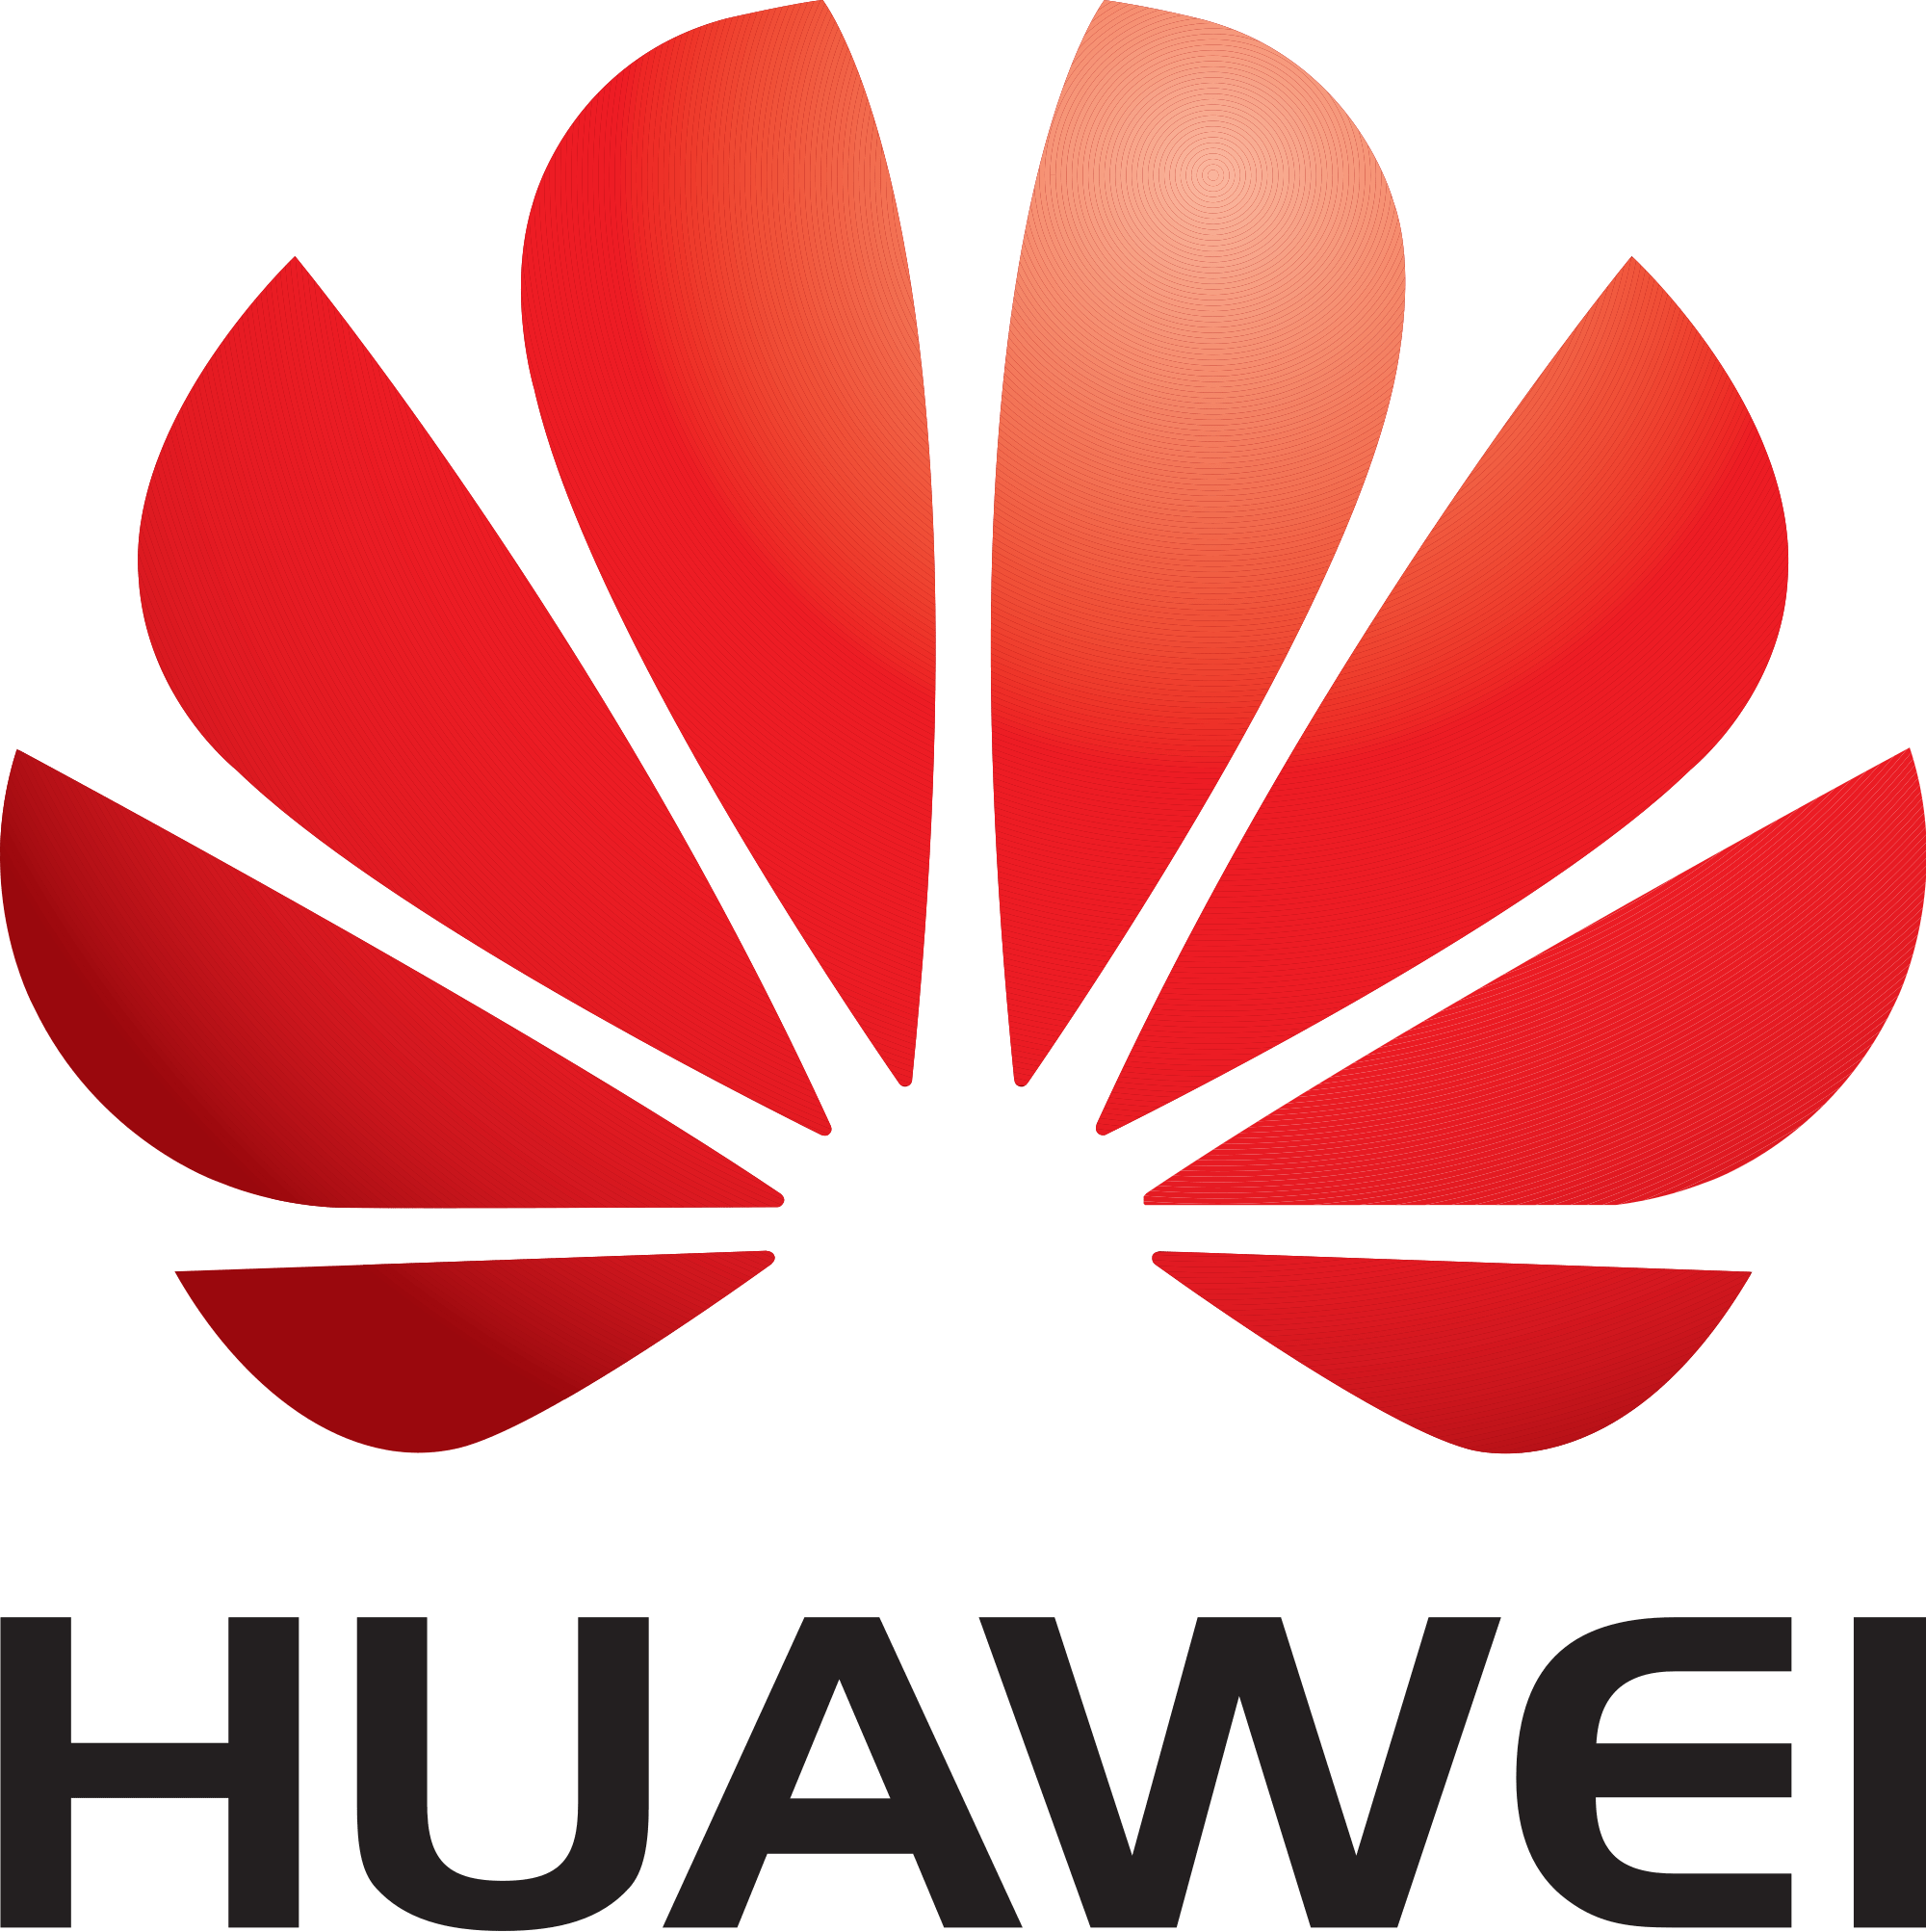 Huawei (Handsets Only) Brand Logo